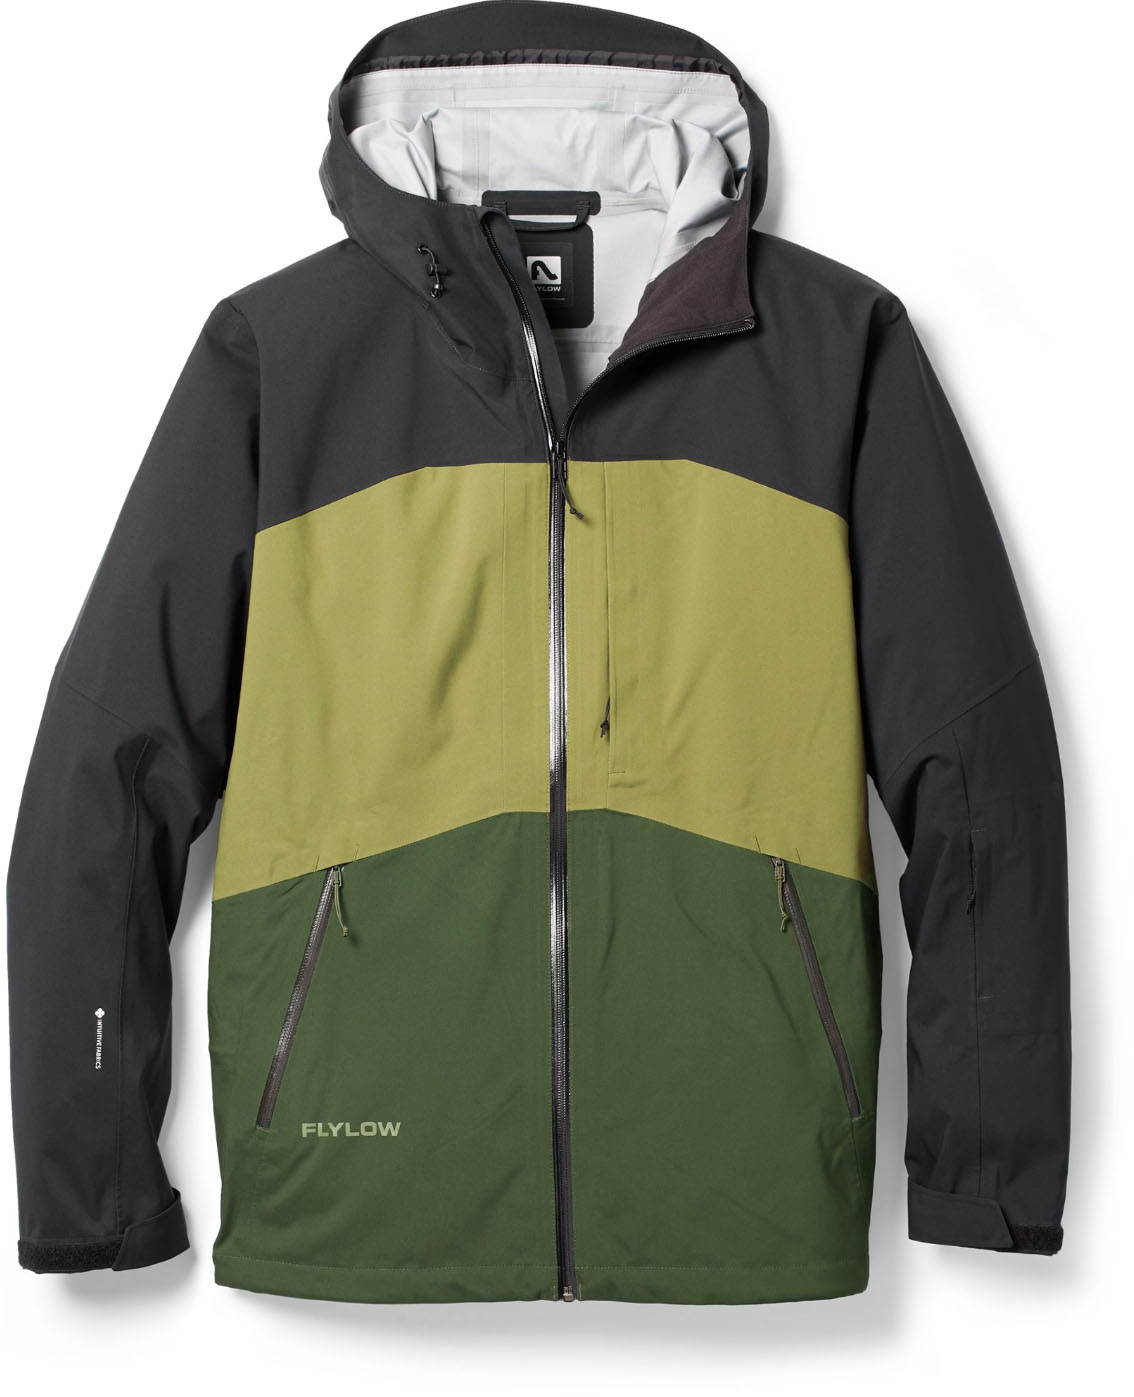 What's the Difference Between a Hoodie and a Jacket? - Cheap Snow Gear